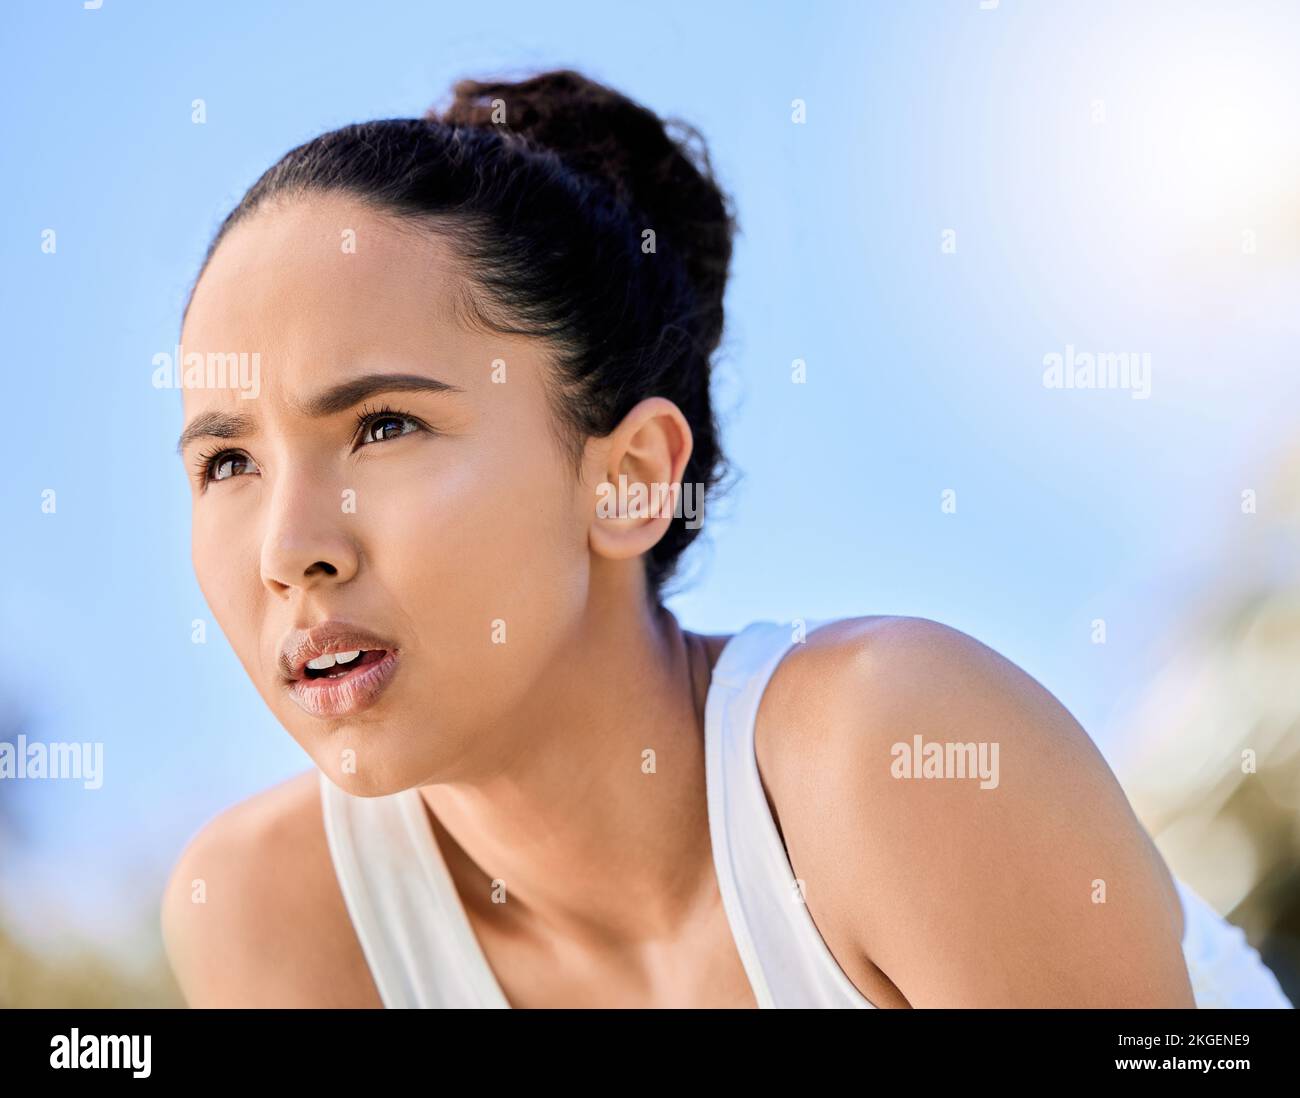 Thinking, focus and woman outdoor, challenge, breathing and tired face, exercise or fitness. Serious female athlete training with mental motivation Stock Photo